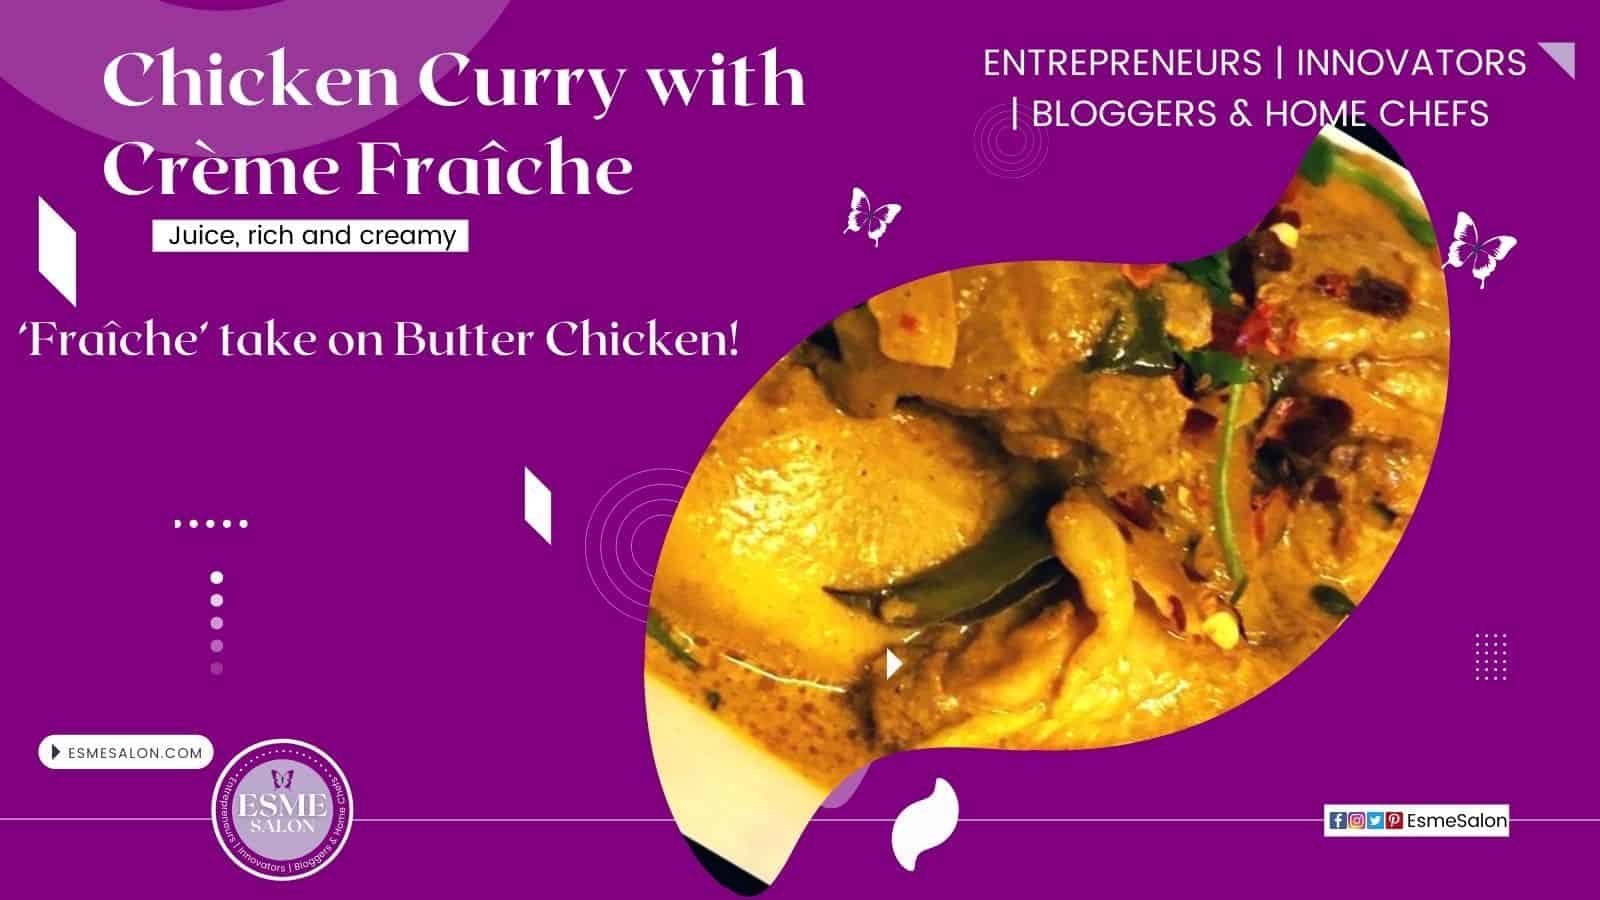 Chicken Curry with Crème Fraîche ala Butter chicken very similar to butter chicken